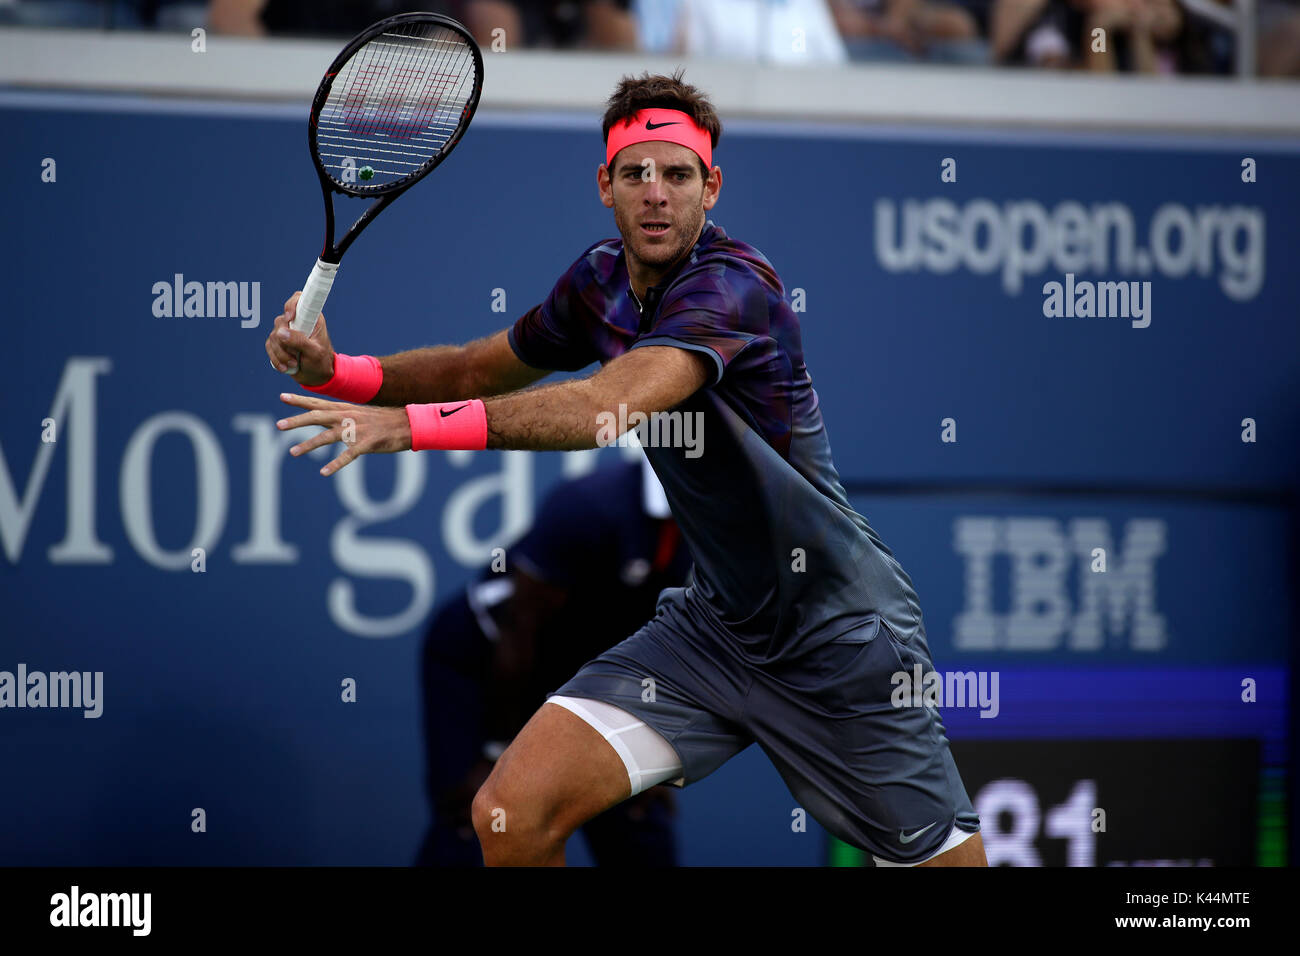 Flushing Meadow, New York, USA. 4th Sep, 2017. US Open Tennis: Juan Martin del Potro sets up a forehand to number 6 seeded Dominic Thiem of Austria in fourth round match at the US Open in Flushing Meadows, New York. del Potro won the match in five sets to advance to the quarterfinals. Credit: Adam Stoltman/Alamy Live News Stock Photo